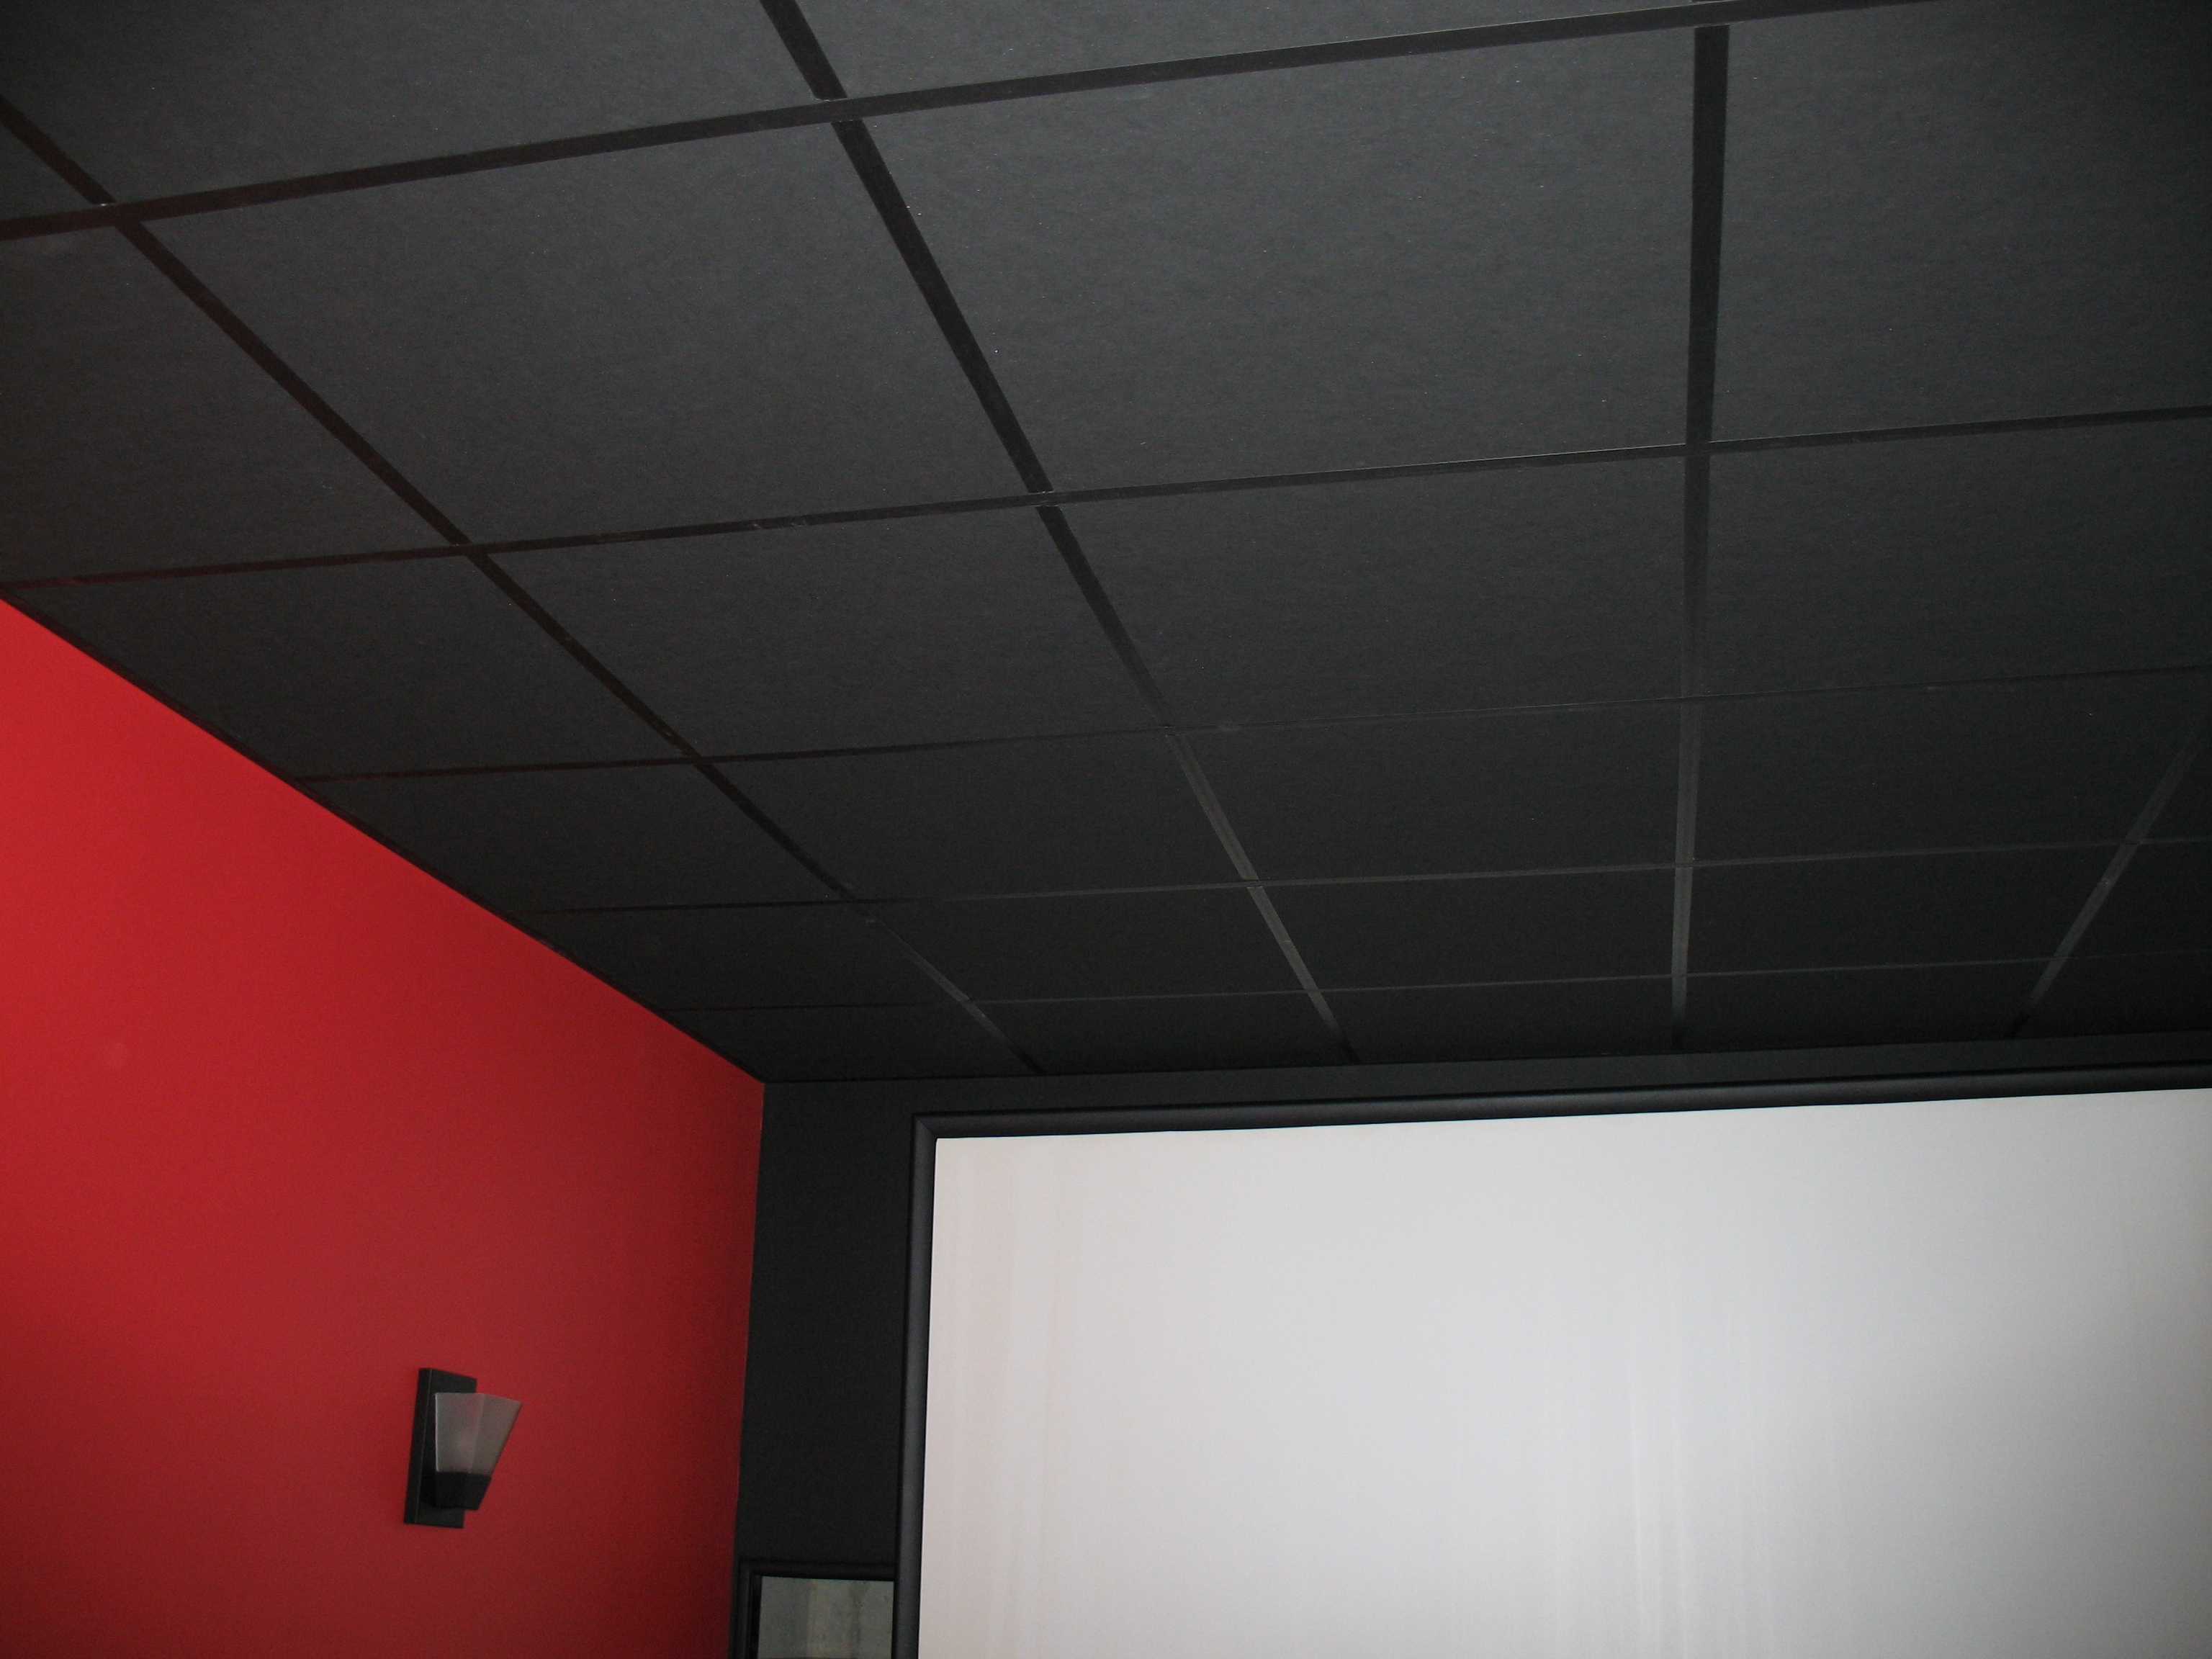 Permalink to Soundproof Suspended Ceiling Tiles